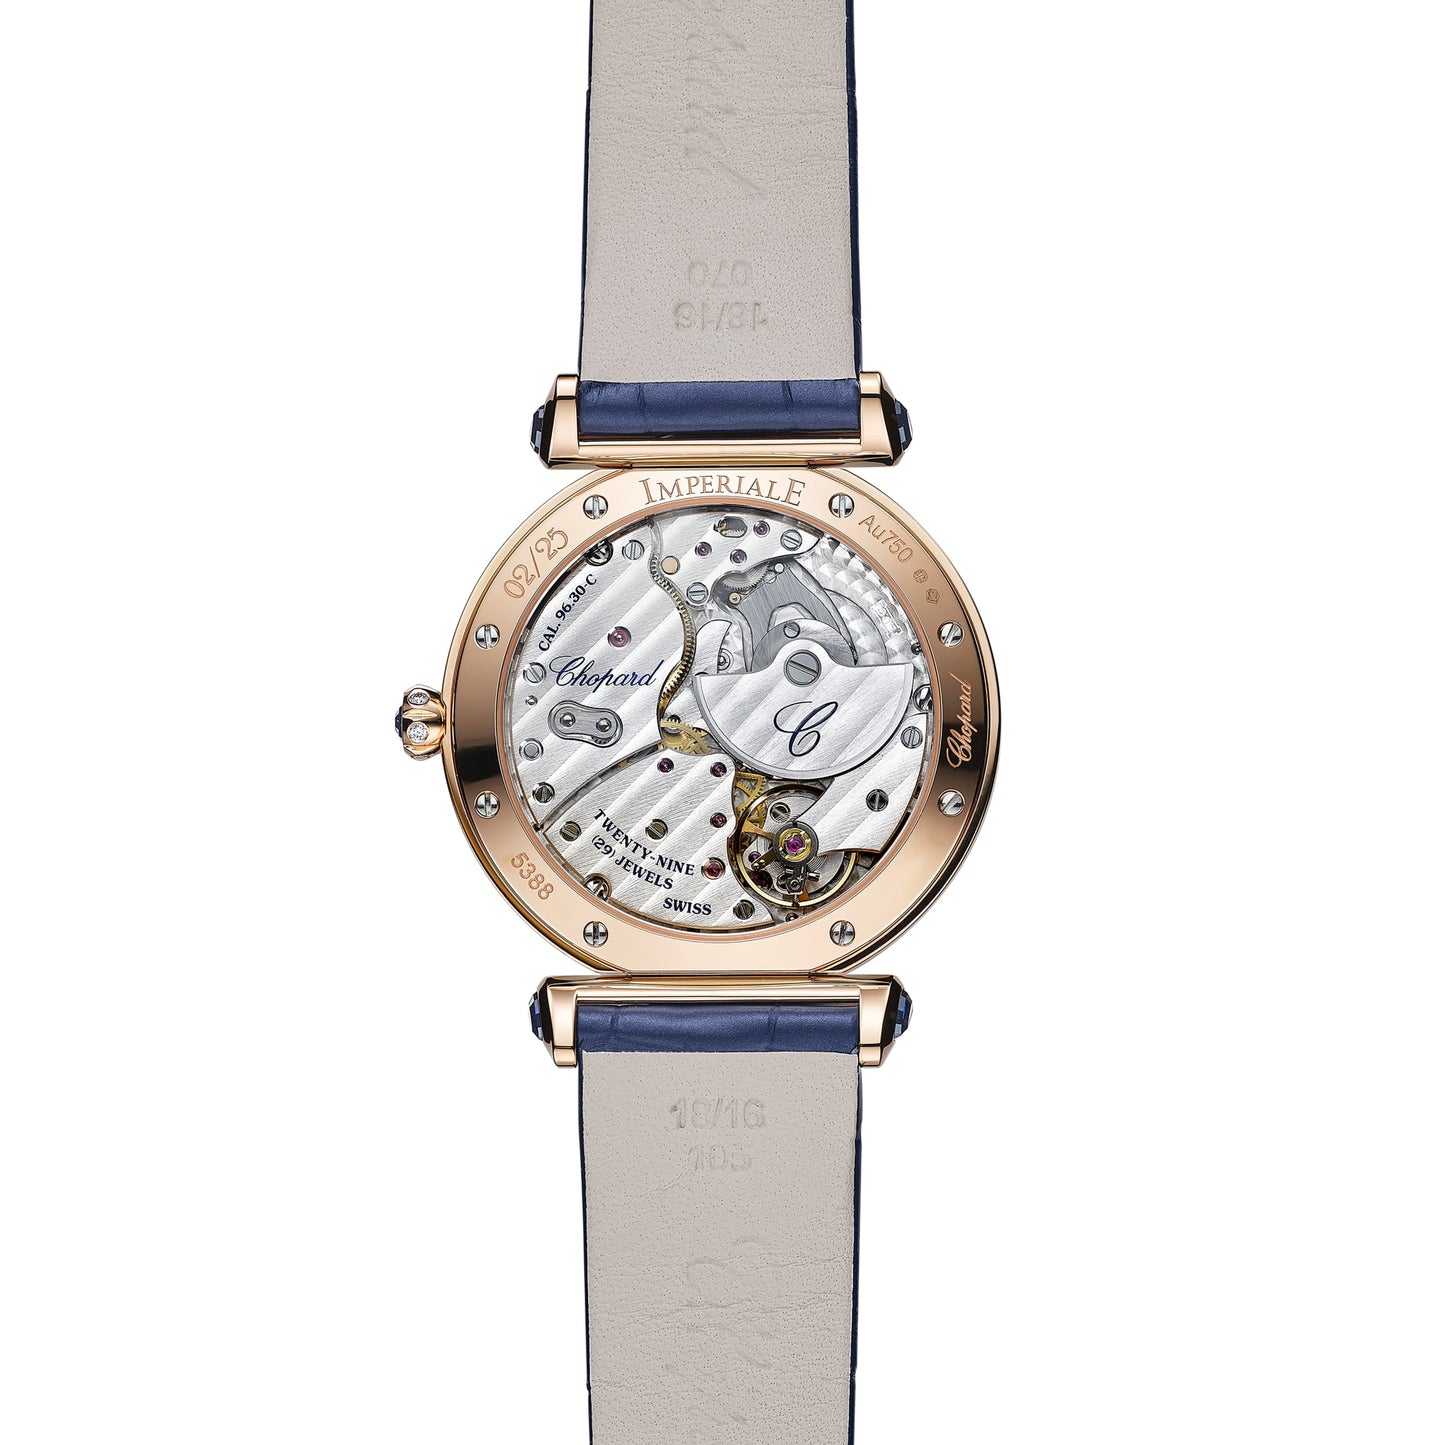 IMPERIALE DAY & NIGHT 36 MM, AUTOMATIC, ETHICAL ROSE GOLD, DIAMONDS, SAPPHIRES 385388-5001